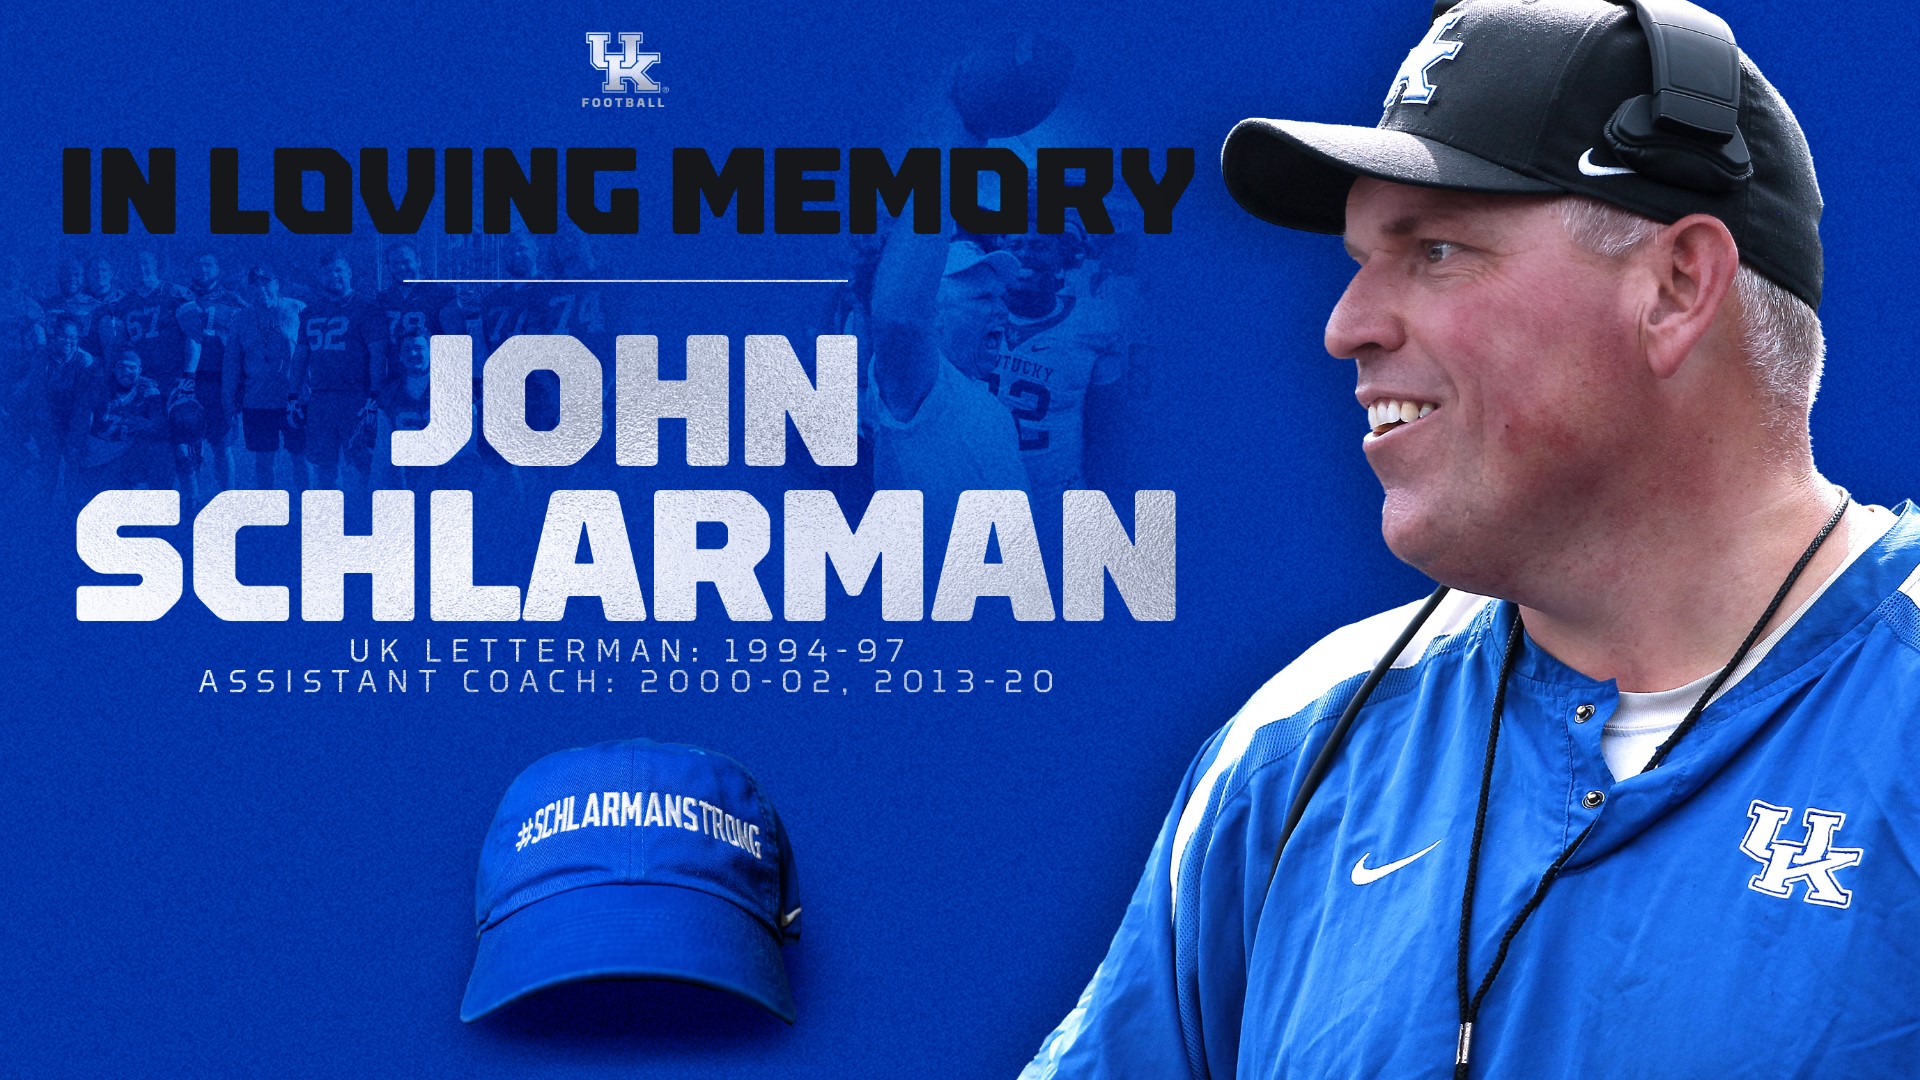 The university said Schlarman passed away Thursday at the age of 45.